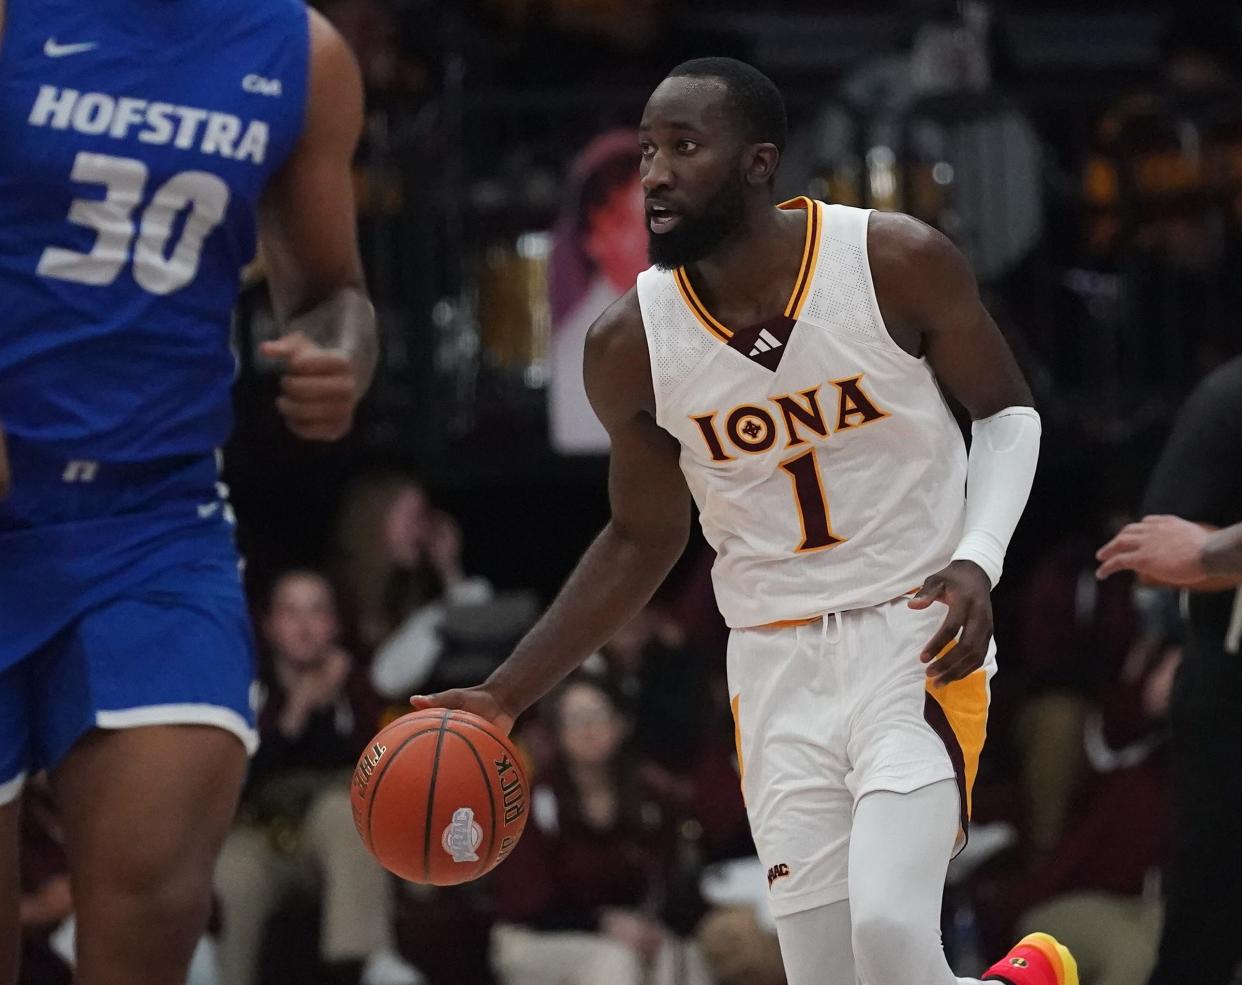 Iona guard Wheza Panzo (1) works the ball during NCAA mens basketball action against Hofstra at Iona University in New Rochelle on Wednesday, Dec 6, 2023.